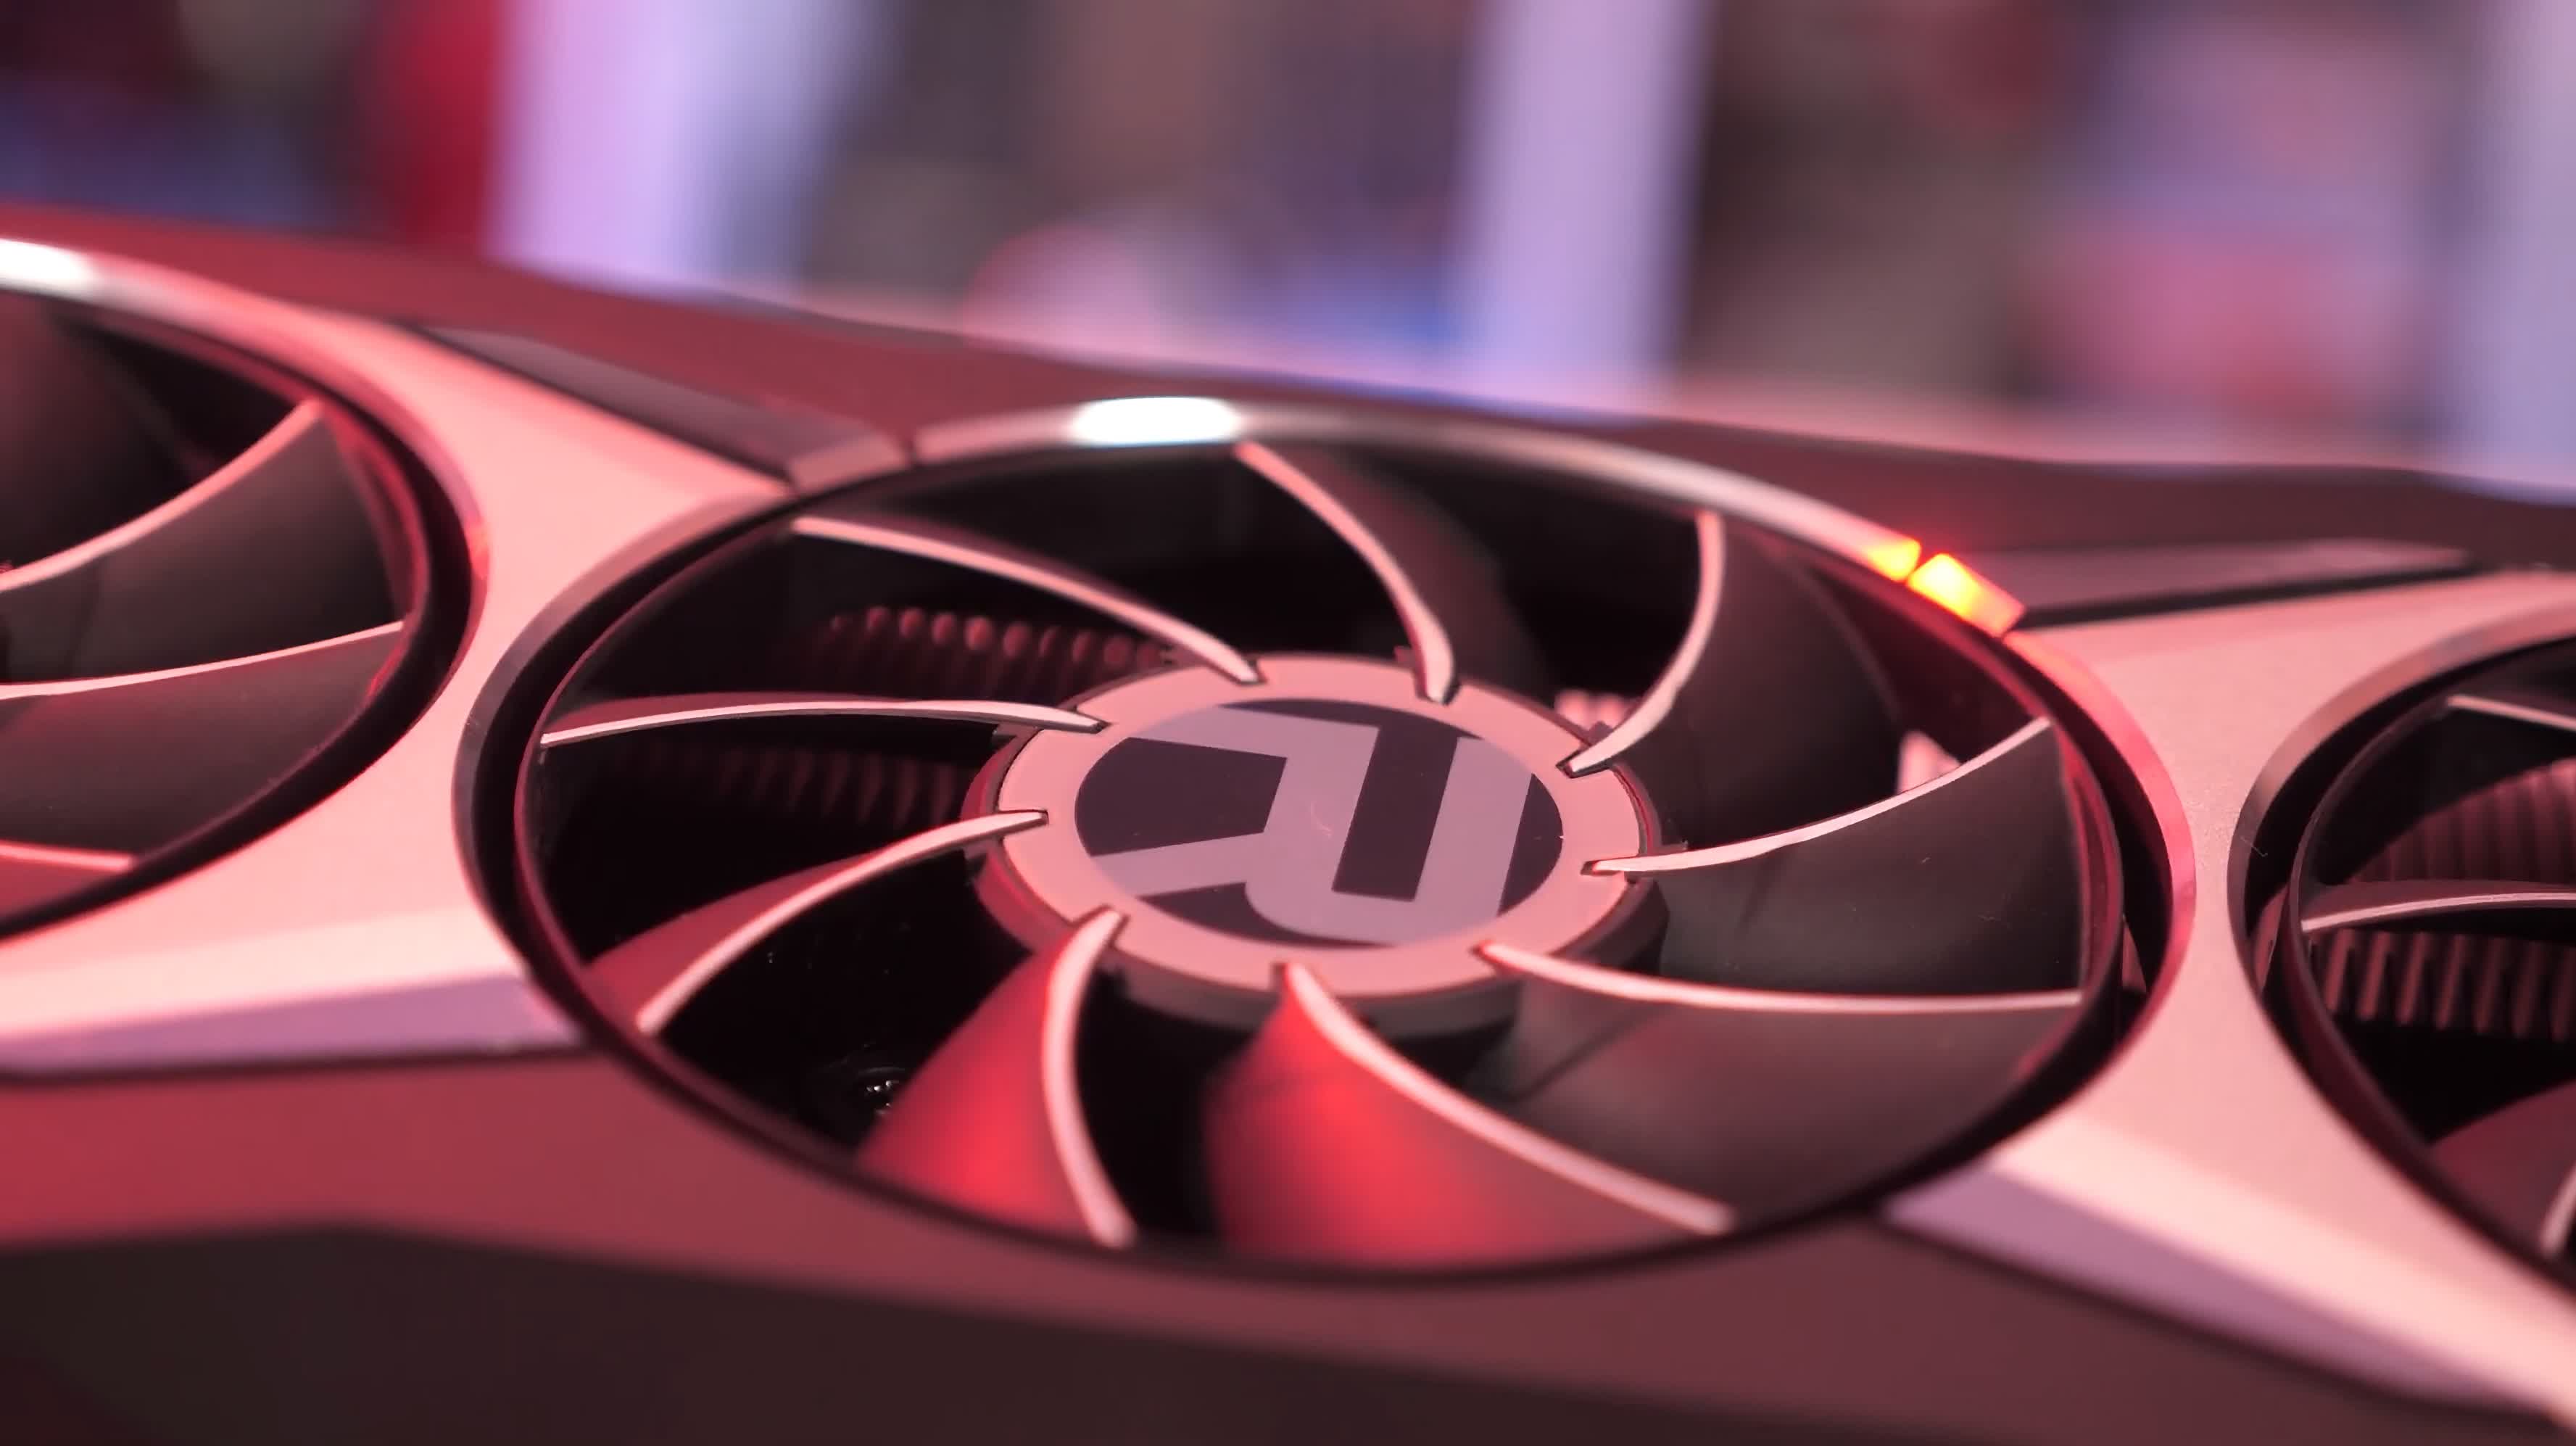 AMD patents a chiplet GPU design quite unlike Nvidia and Intel's